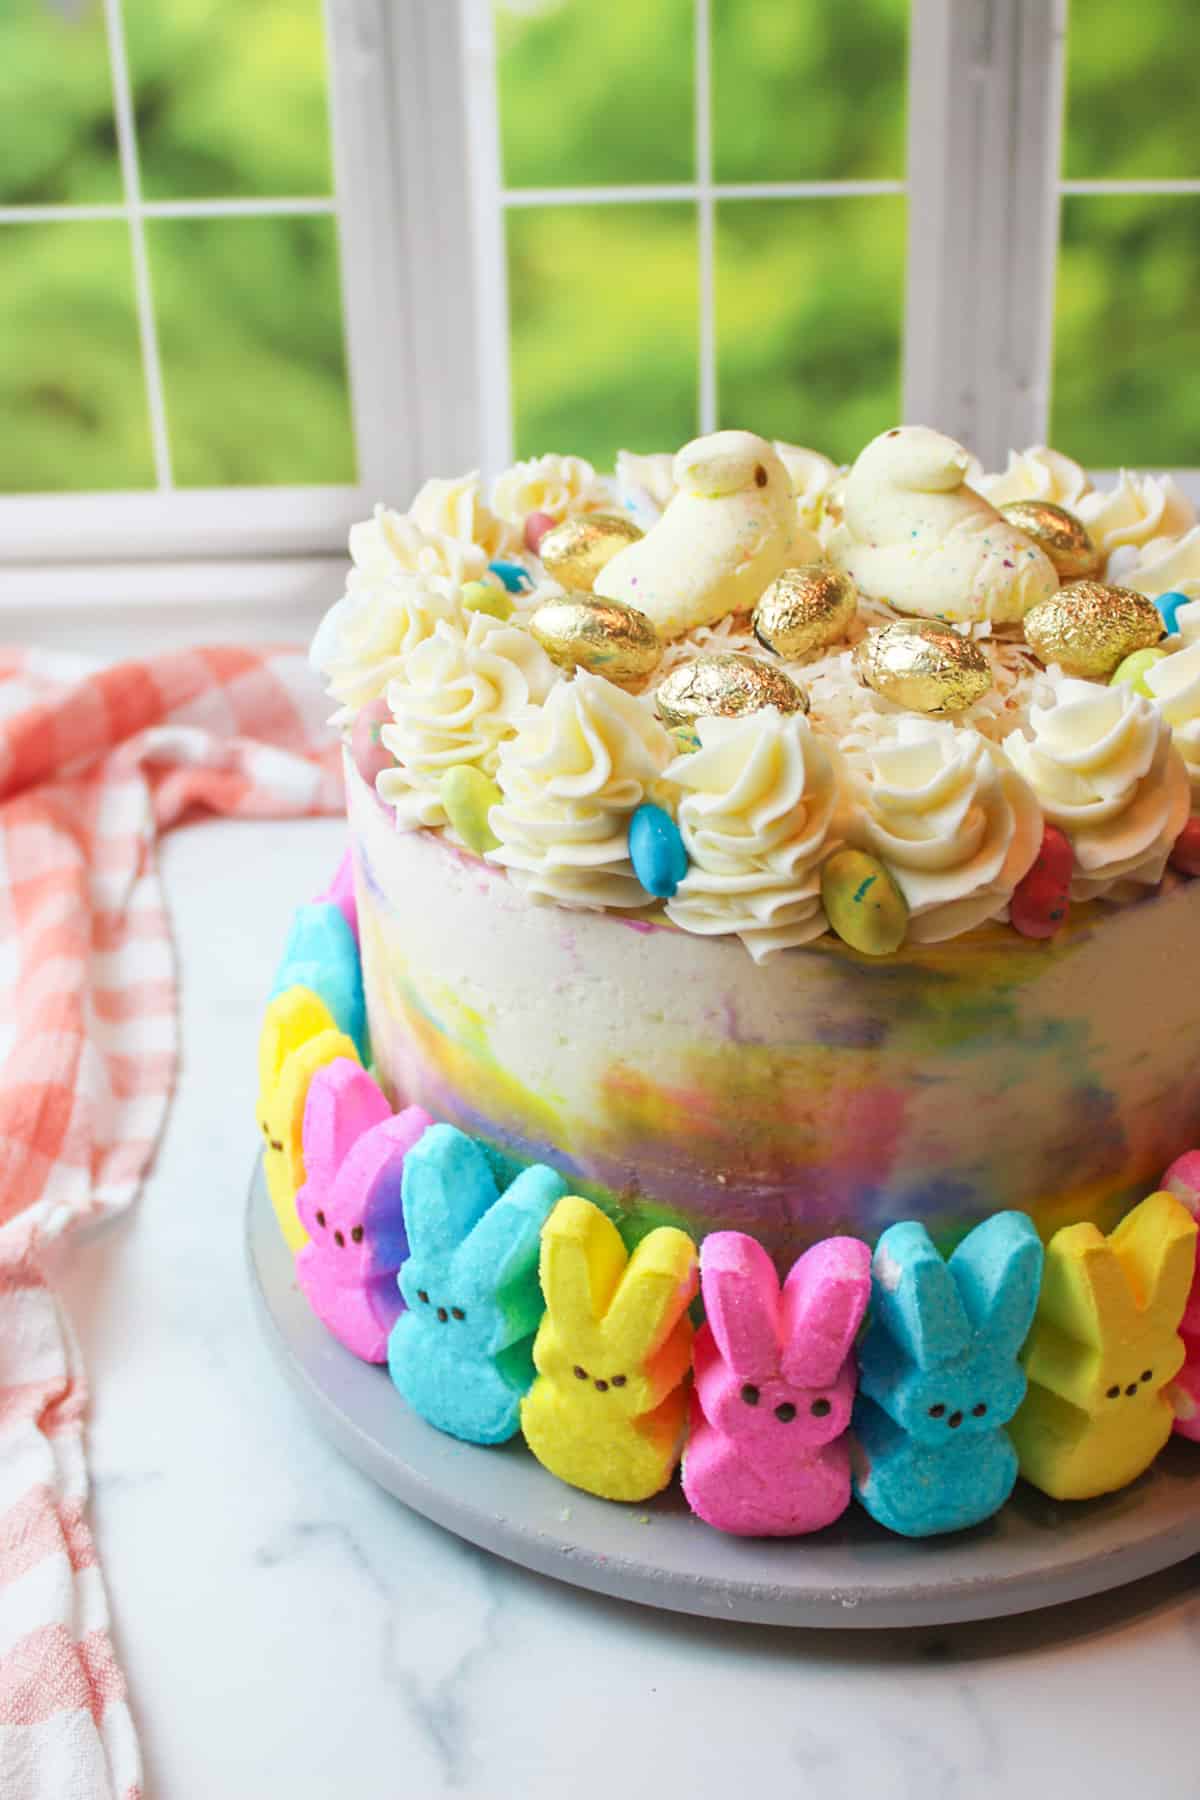 pink blue and yellow peeps around a colorful easter cake topped with shredded cocoanut and golden egg candies